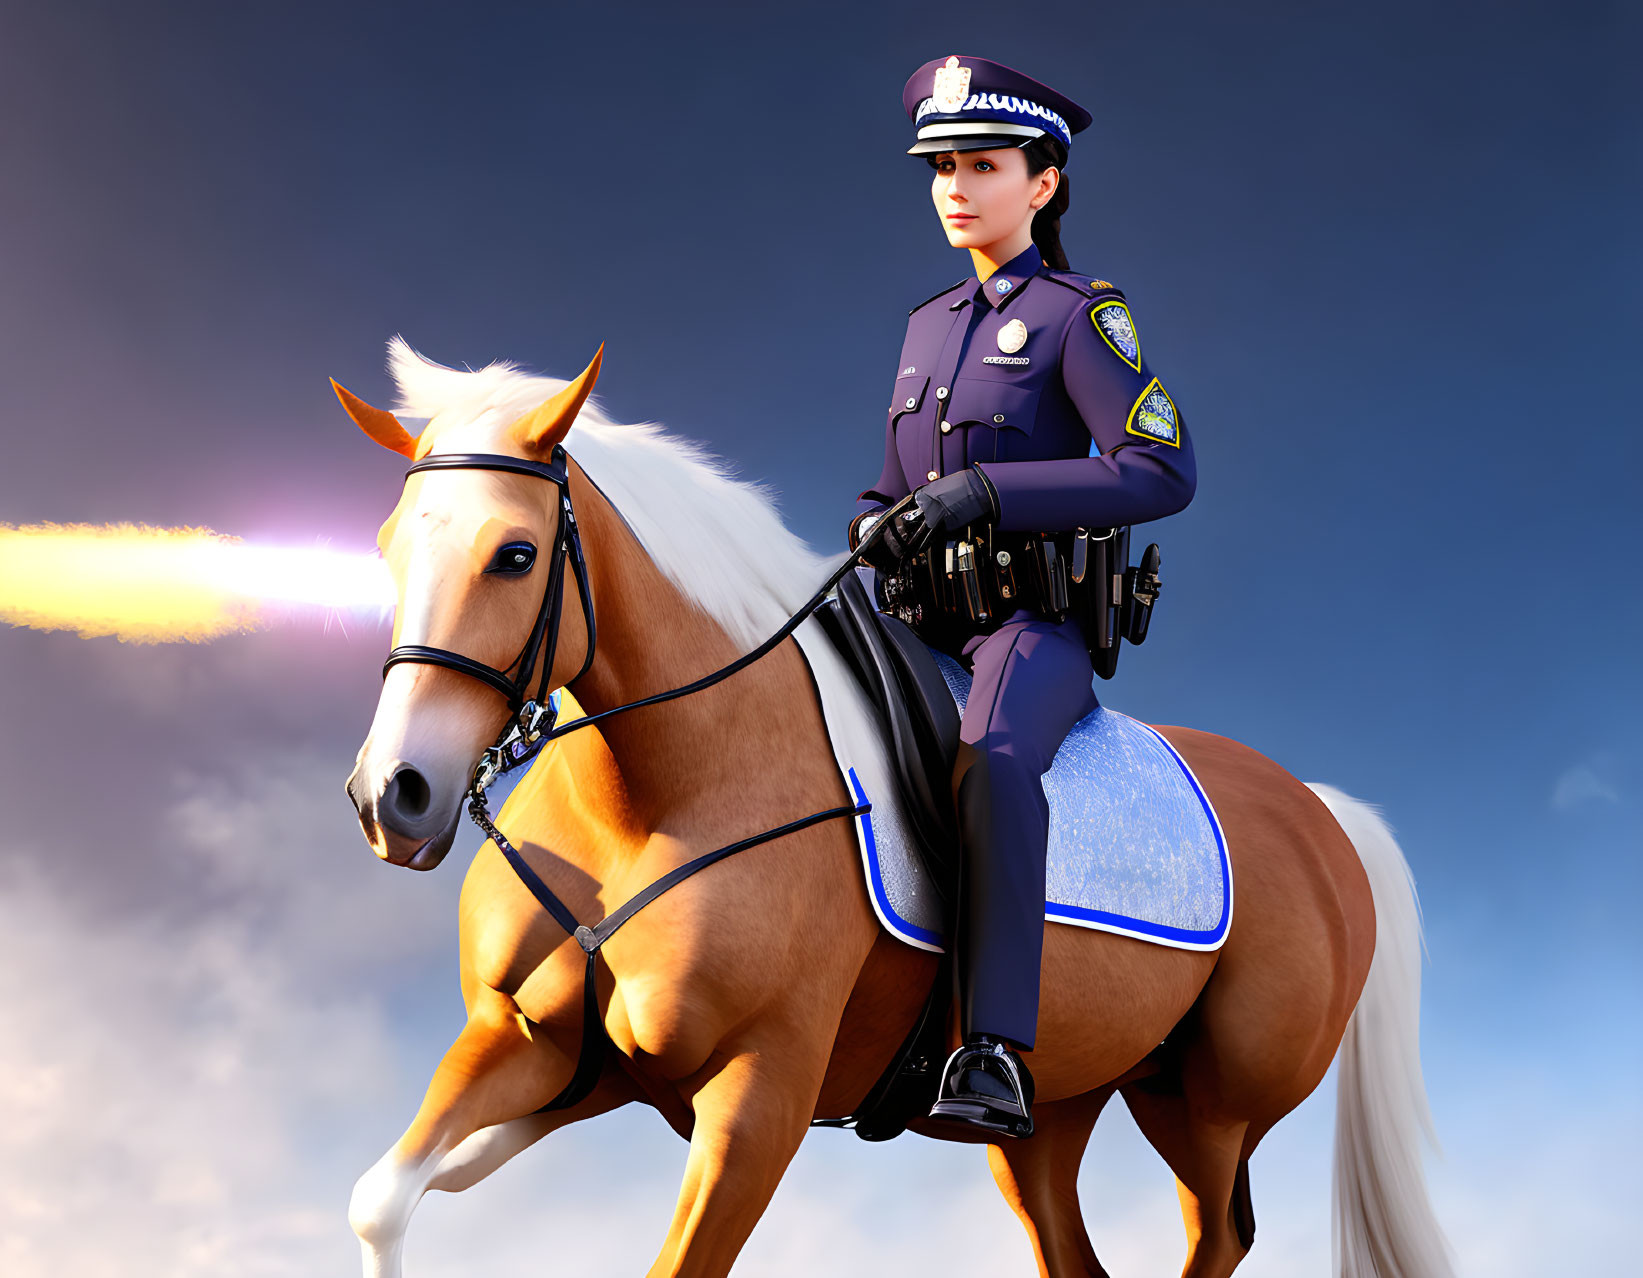 Stylized female police officer on horse with fantastical light beam